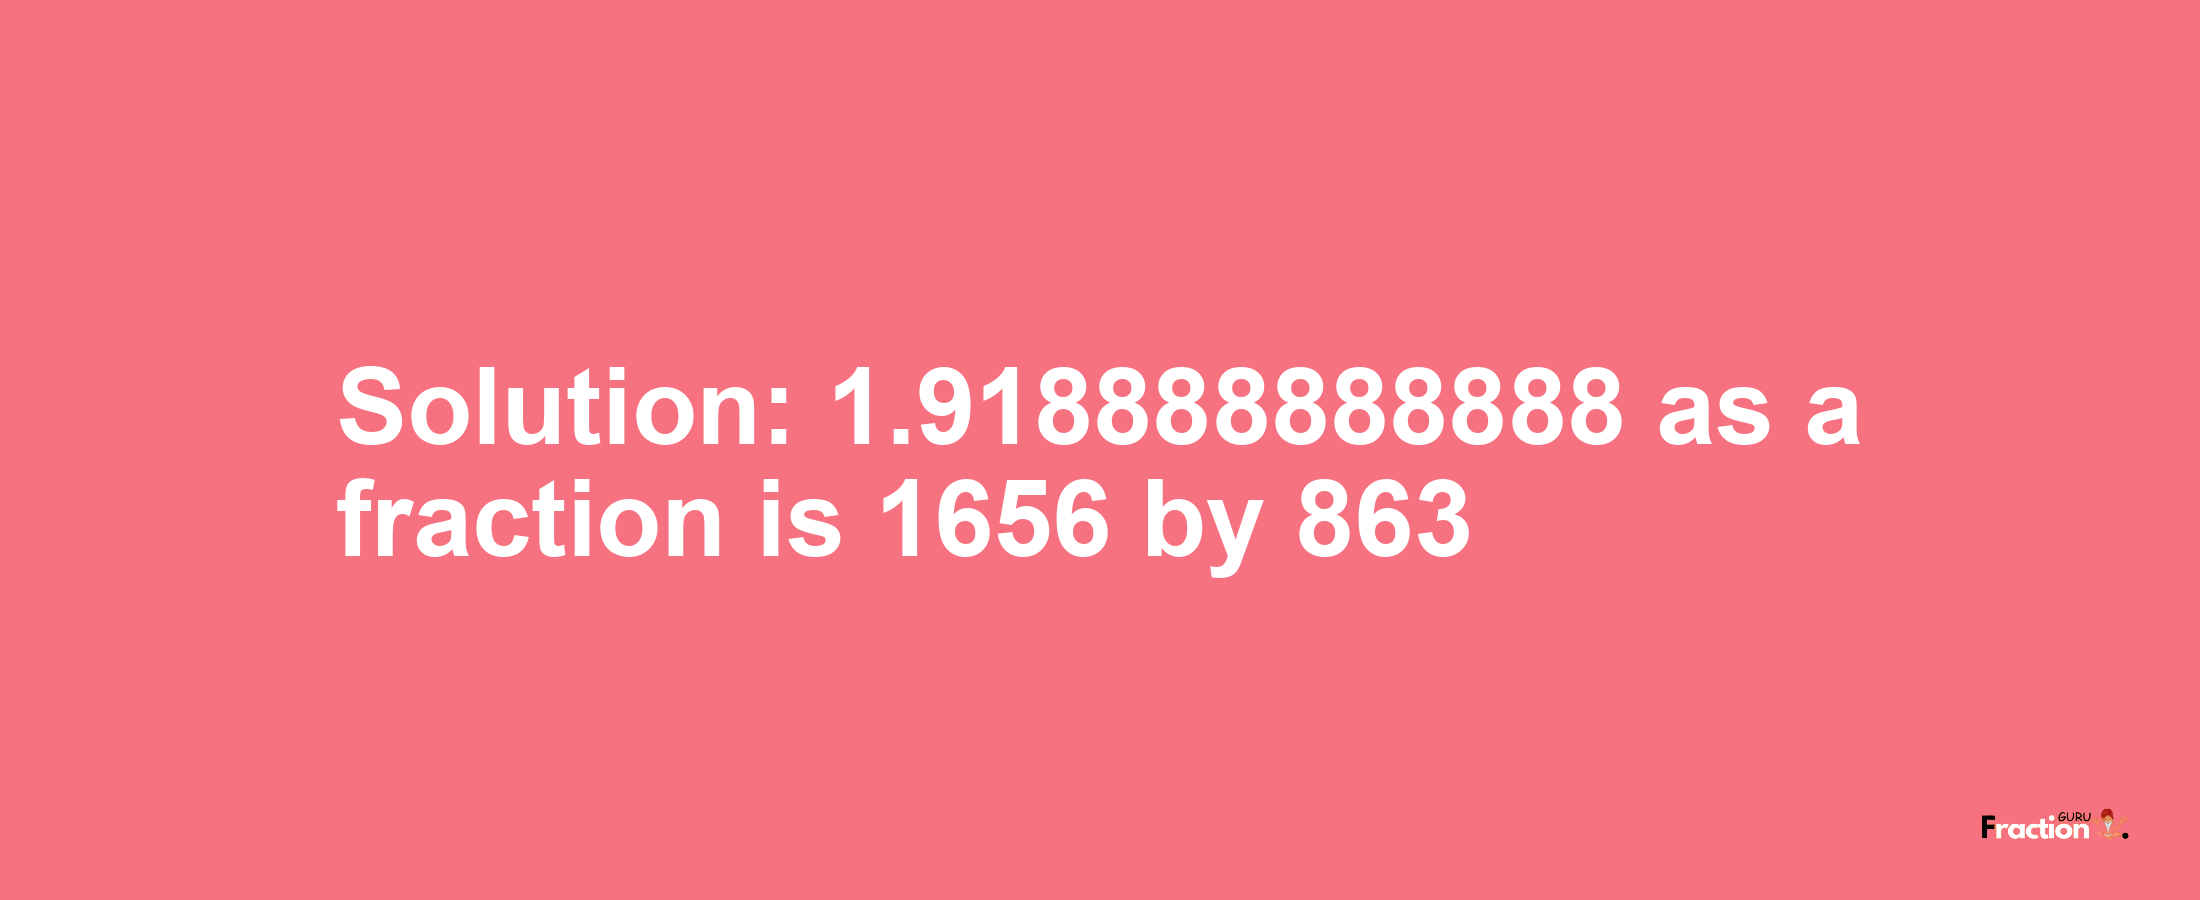 Solution:1.918888888888 as a fraction is 1656/863